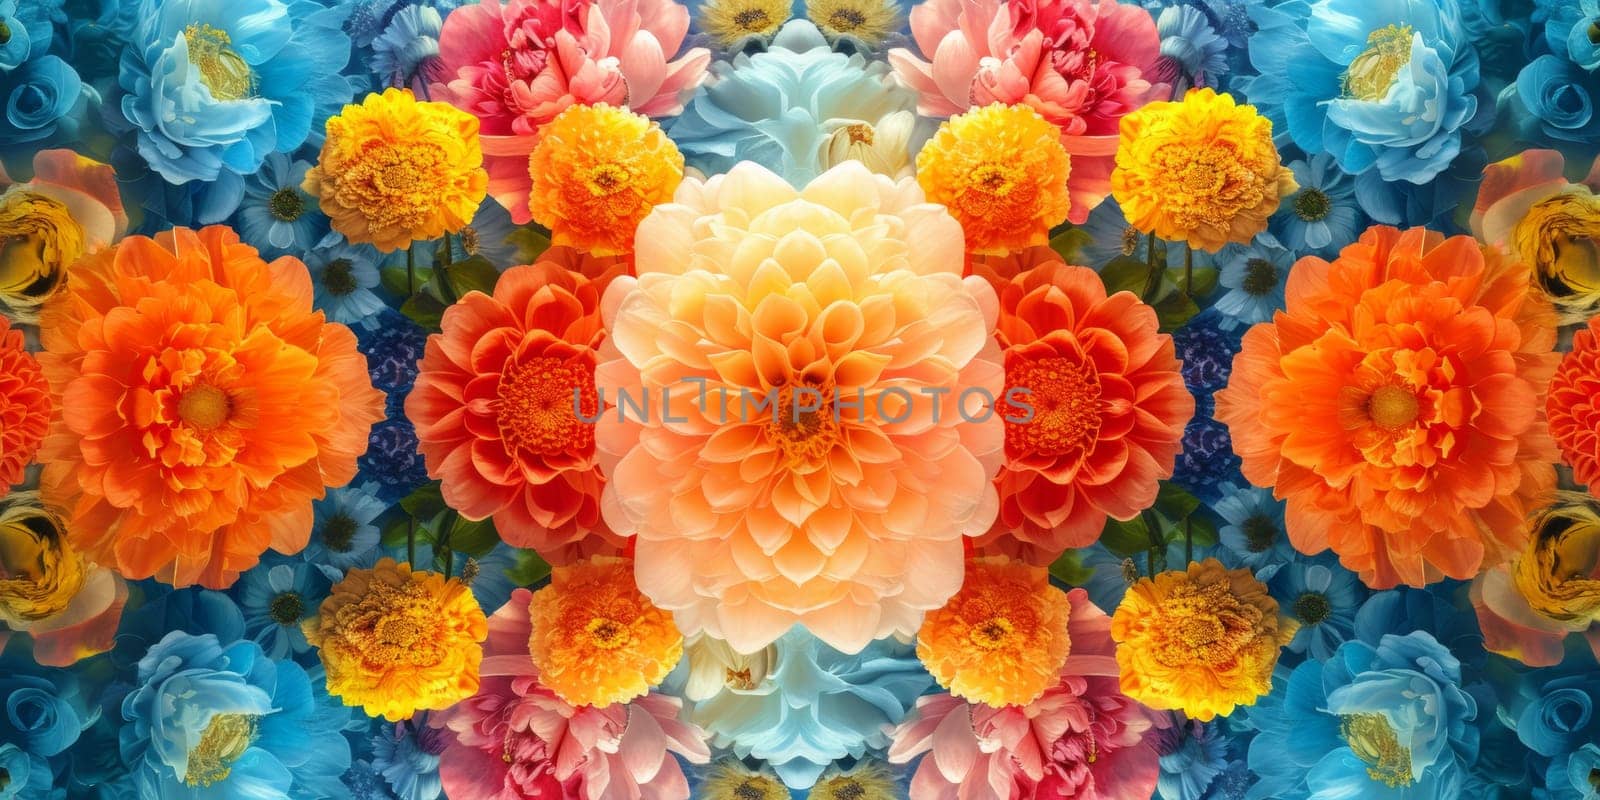 A large colorful flower pattern with many different colors